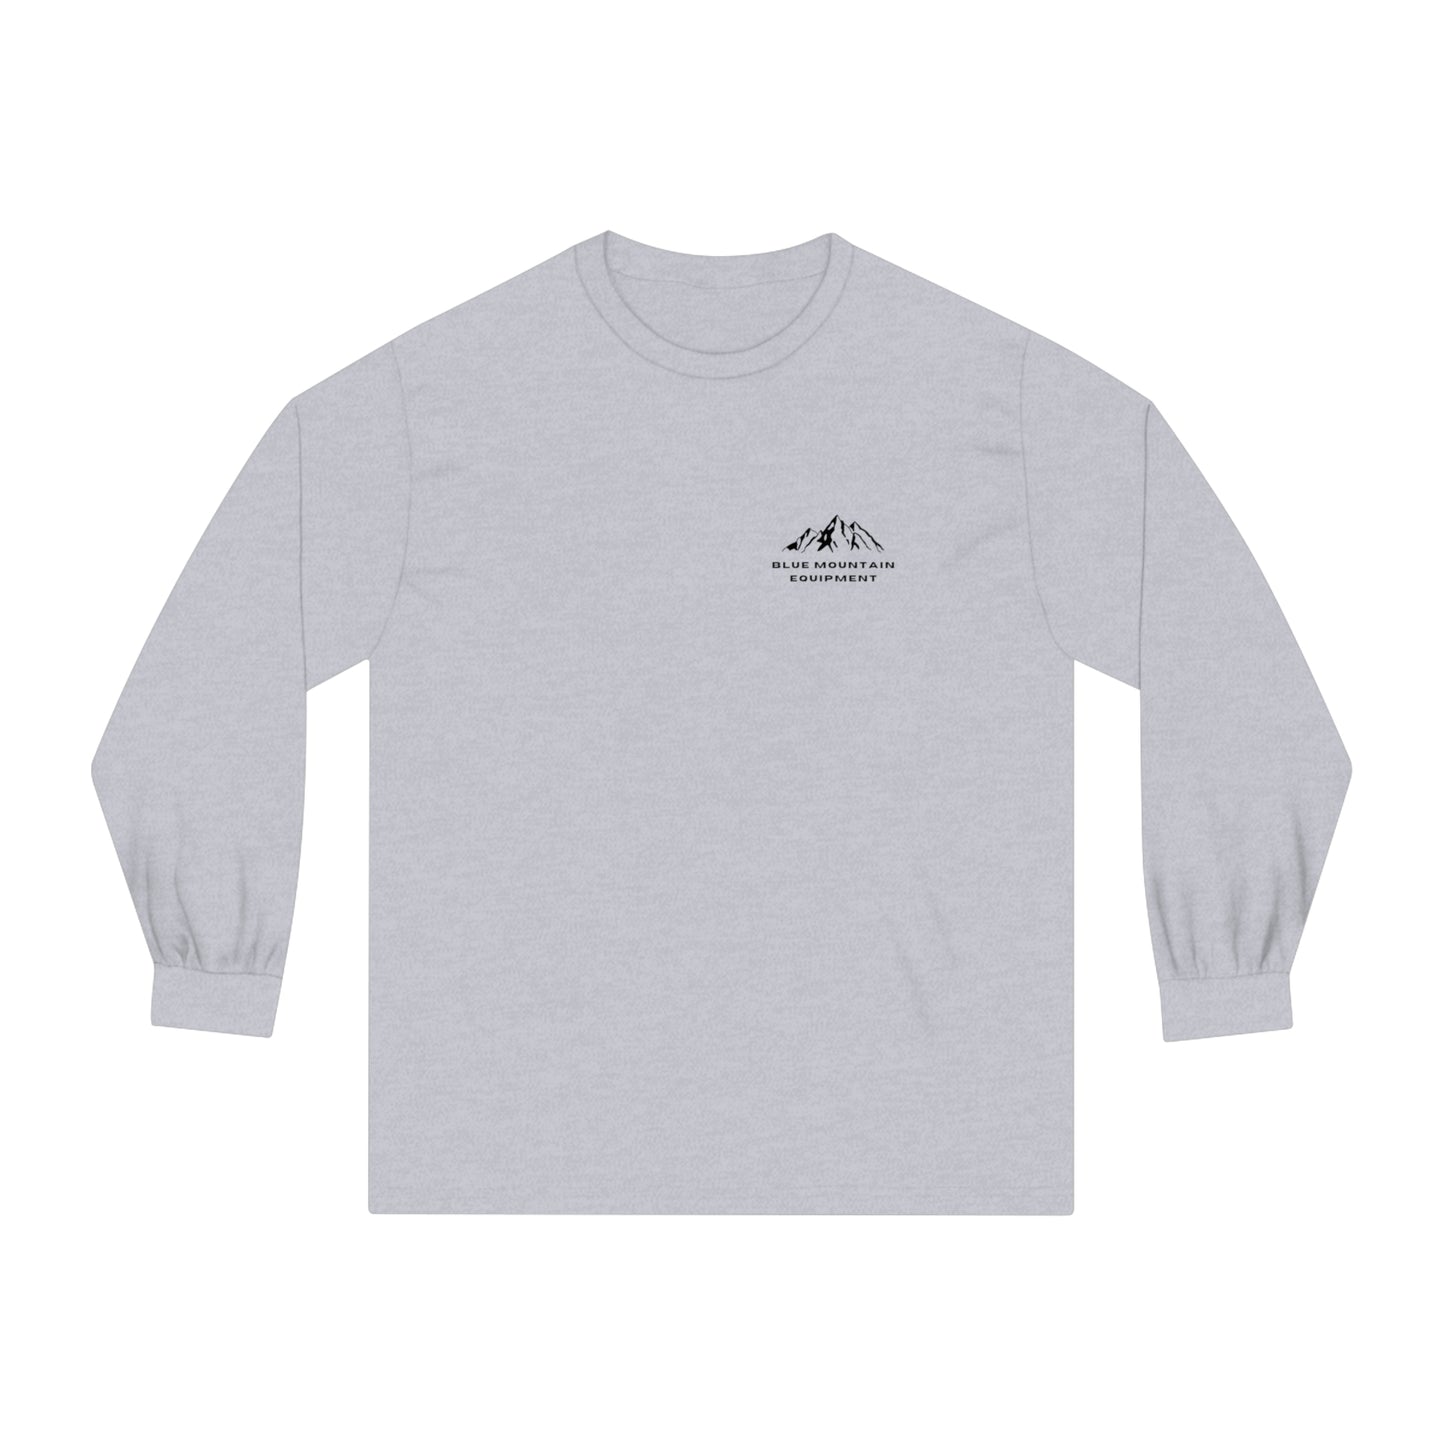 Unisex Classic Long Sleeve T-Shirt - Paddles Down Bottoms Up